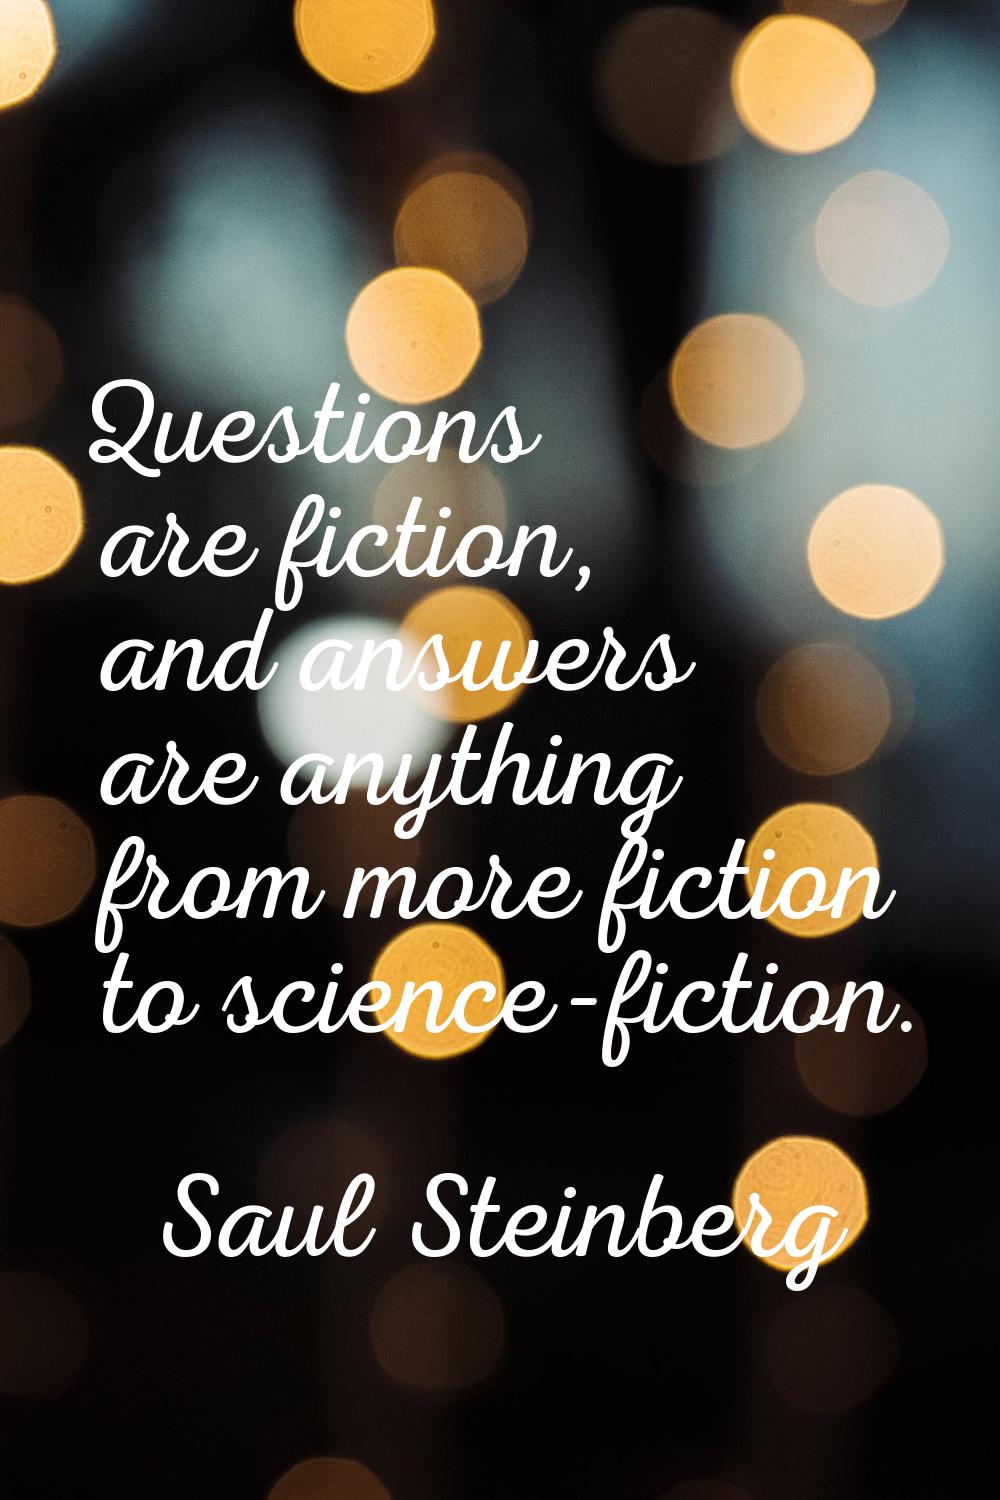 Questions are fiction, and answers are anything from more fiction to science-fiction.